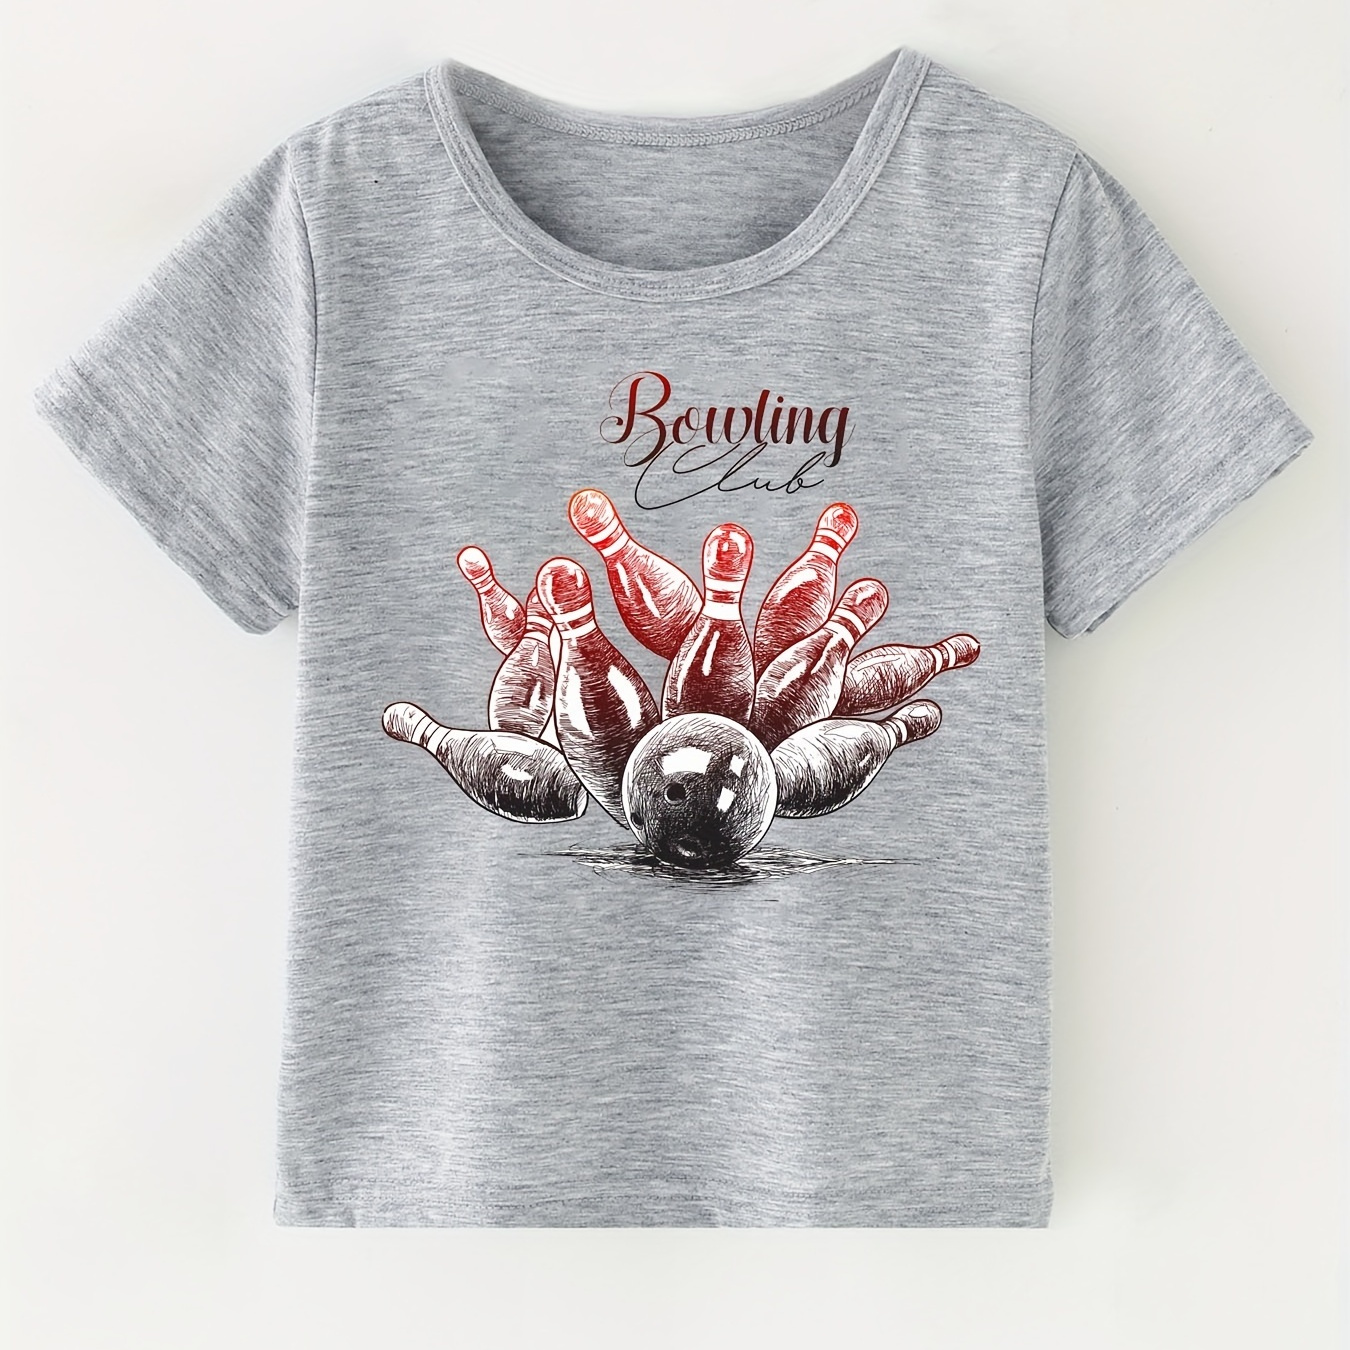 

Bowling Print Boys Creative T-shirt, Casual Lightweight Comfy Short Sleeve Tee Tops, Kids Clothes For Summer